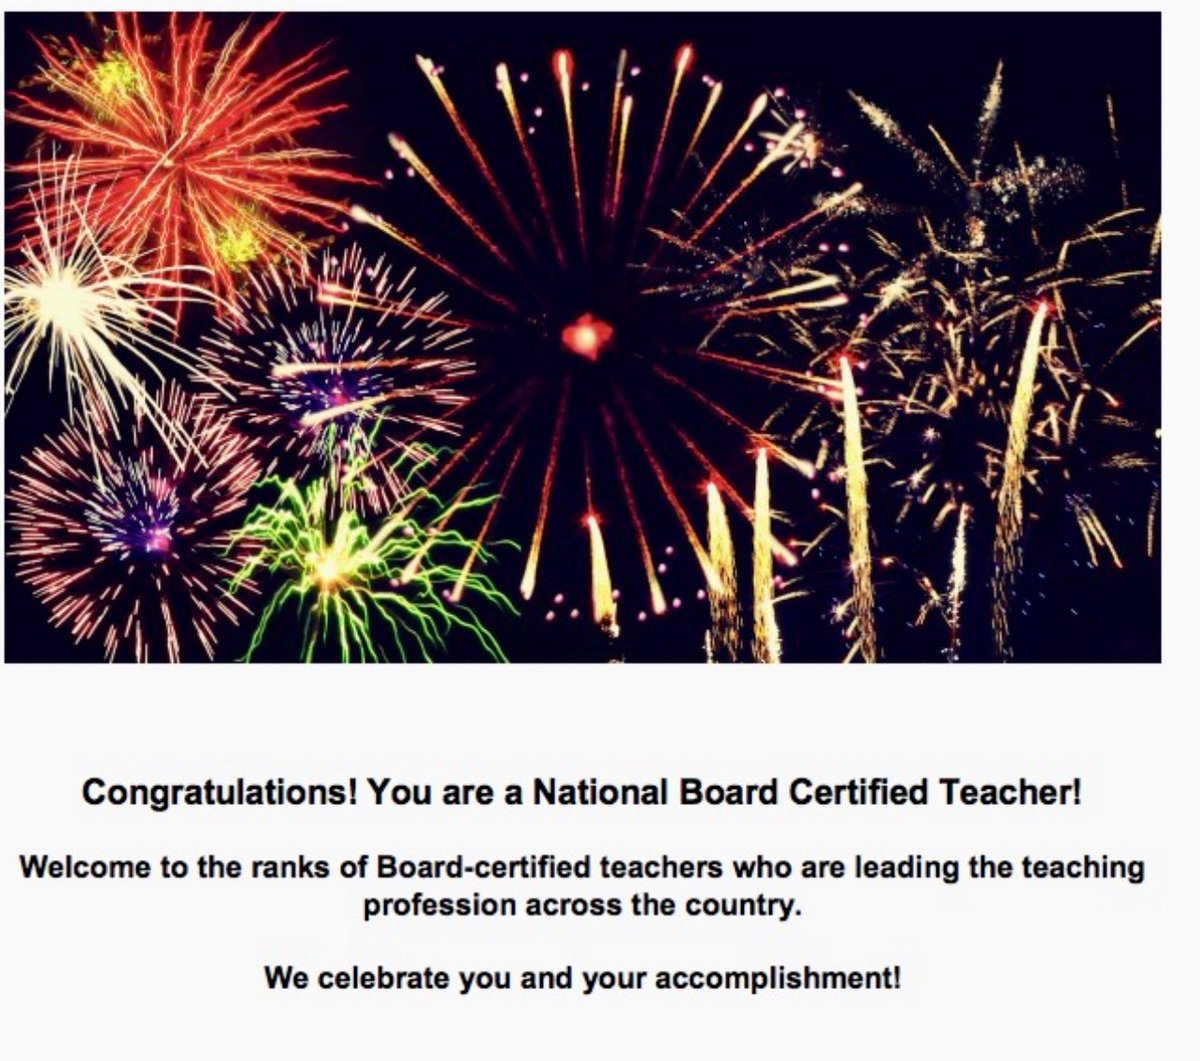 Our own Jessica @hoagland_kms has earned her #NBCT ranking! We are so proud of her work! @JCPS_CAO @OVECkyed @KyDeptofEd @jcpsPDL @JCPSAcademics